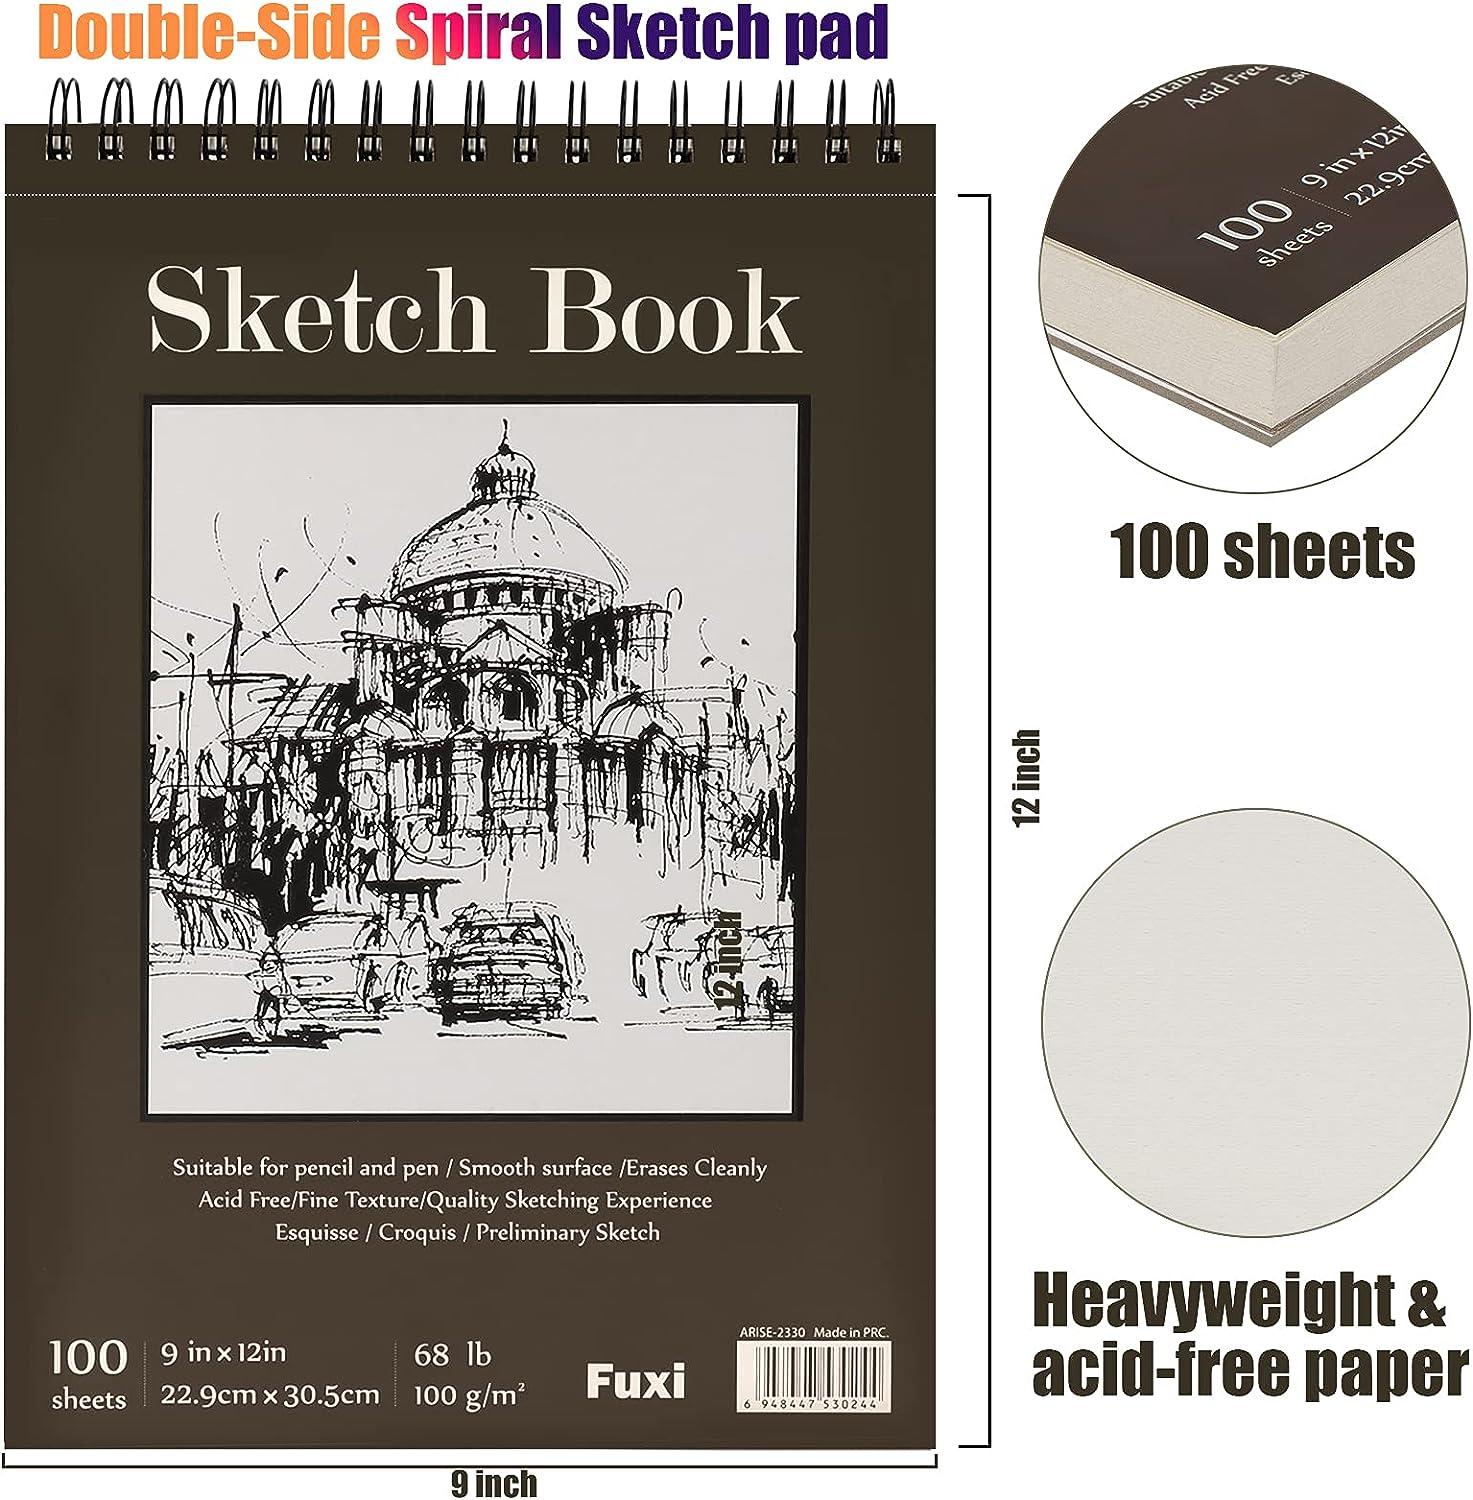 Sketchbook: Sketch Pad for Drawing, Doodling, Writing or Sketching 120  Blank Pages, 8.5 x 11 inches Large Sketchbook Journal Notebook White Paper  Blank Drawing Book : Sketchbooks by LPV : 9781716291944 : Blackwell's